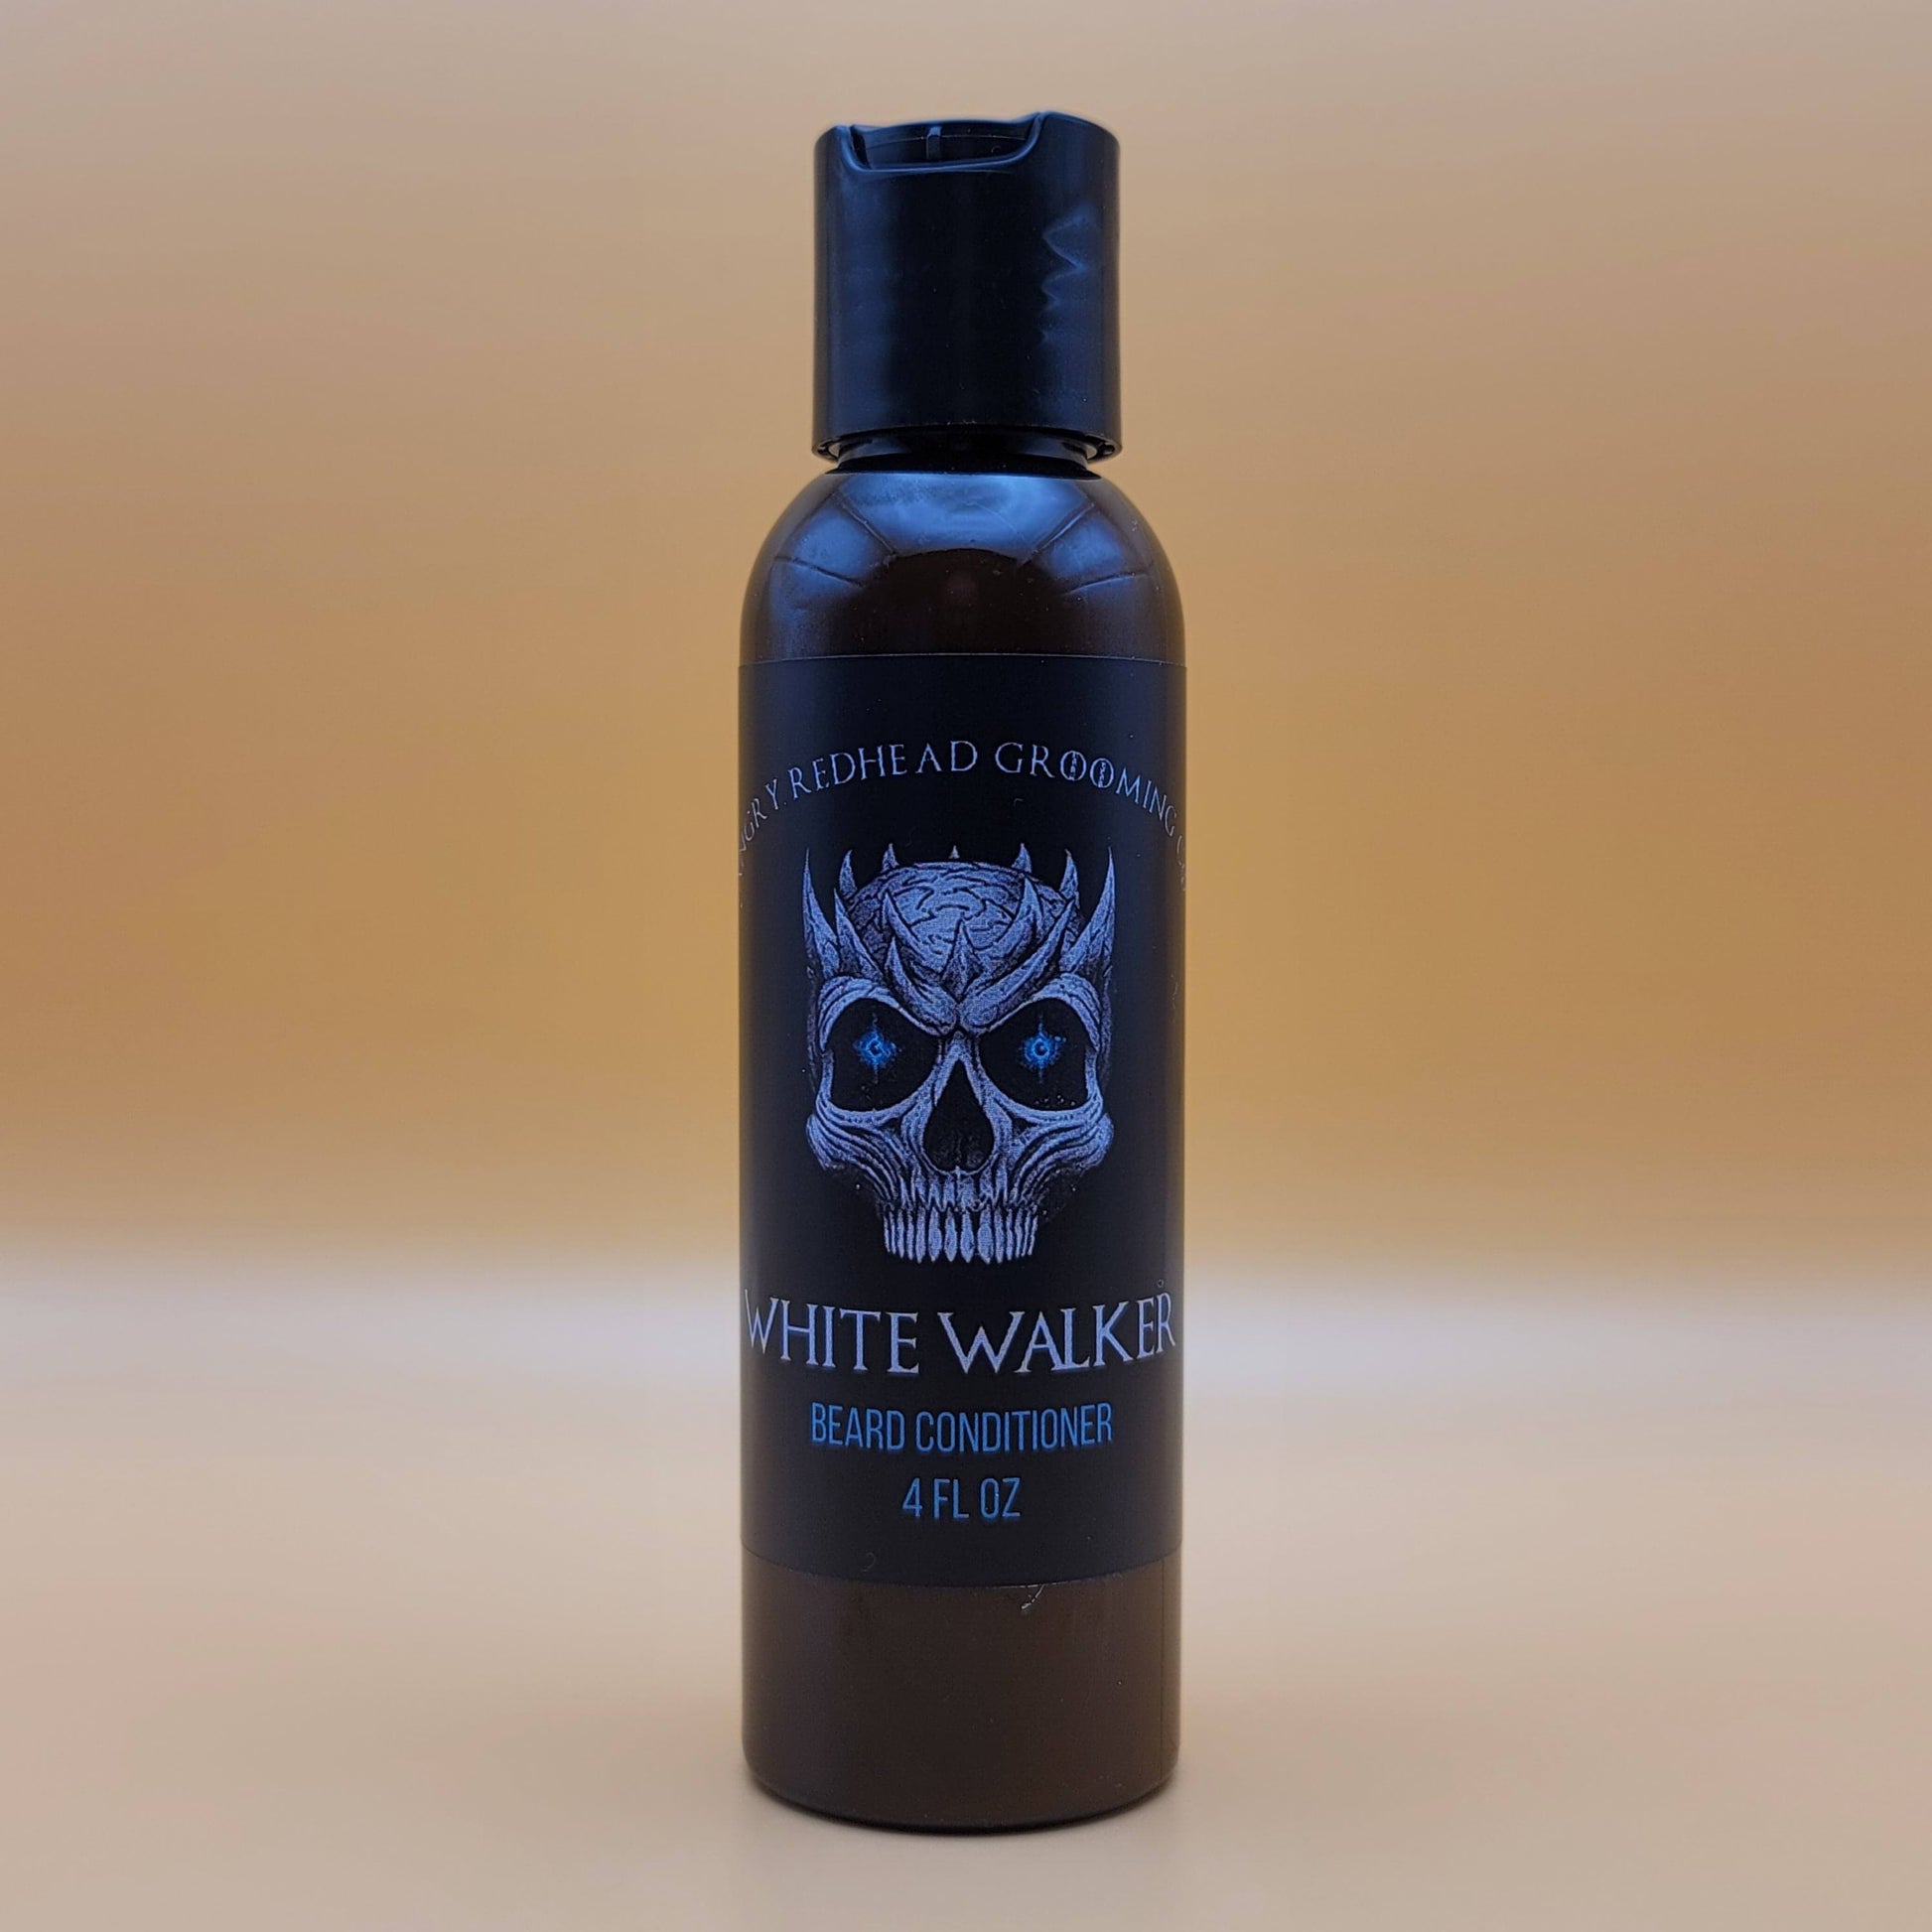 White Walker Beard Conditioner by Angry Redhead Grooming Co - angryredheadgrooming.com